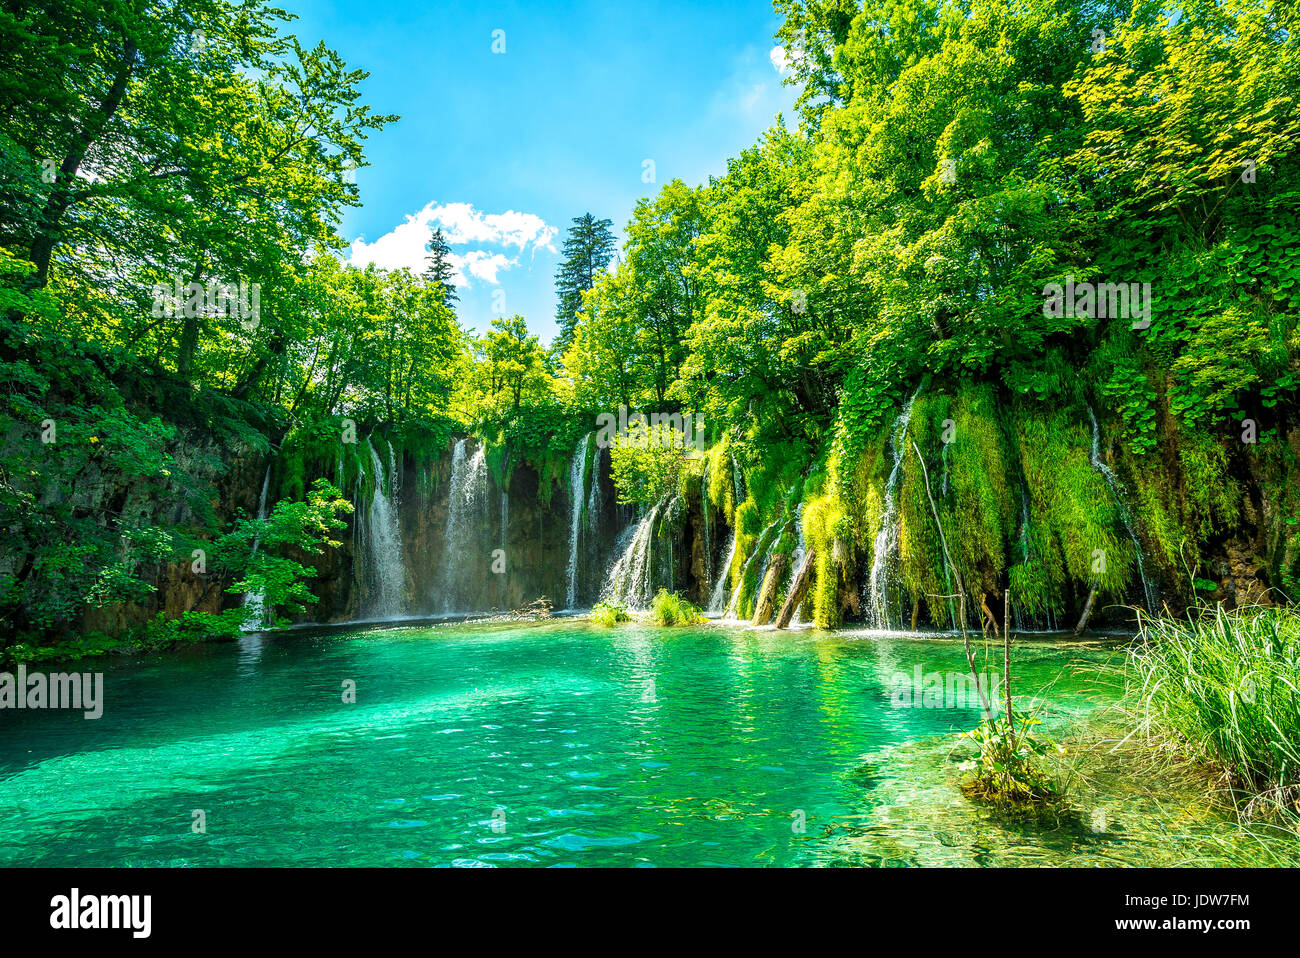 One of the many cascades at Plitvice Lakes National Park Stock Photo